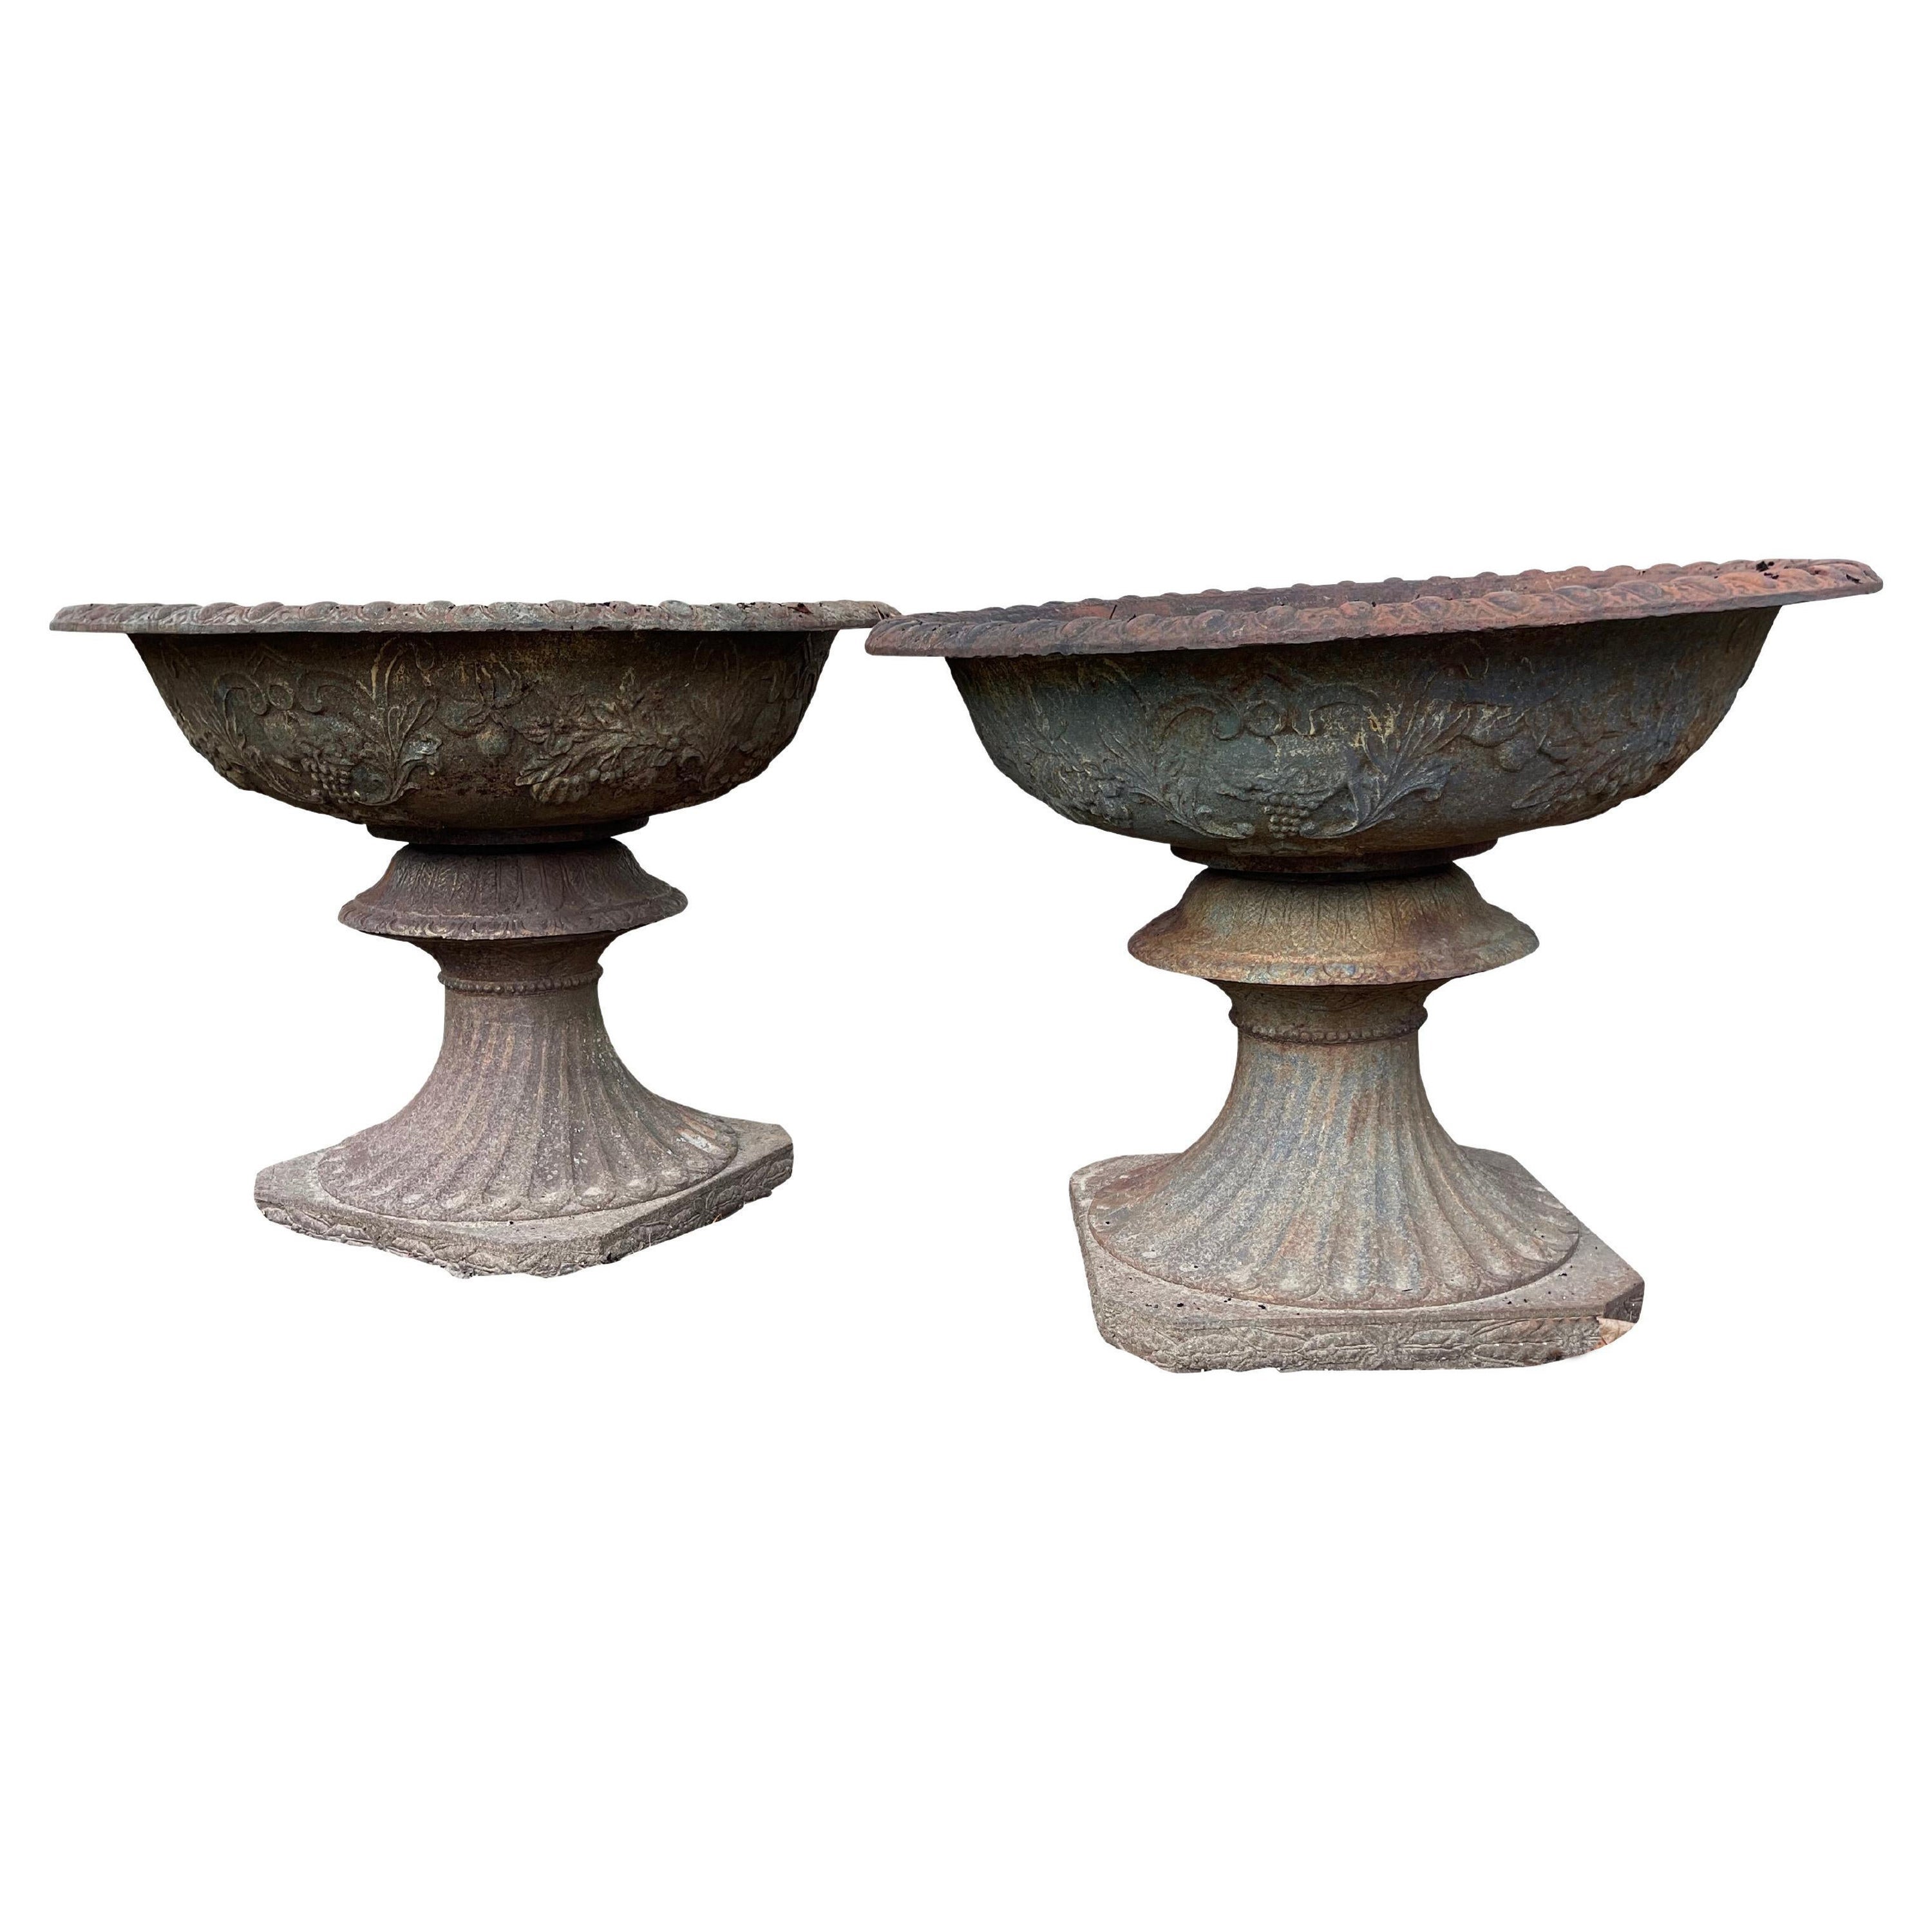  Cast Iron Urns with Foliate and Grape Design For Sale